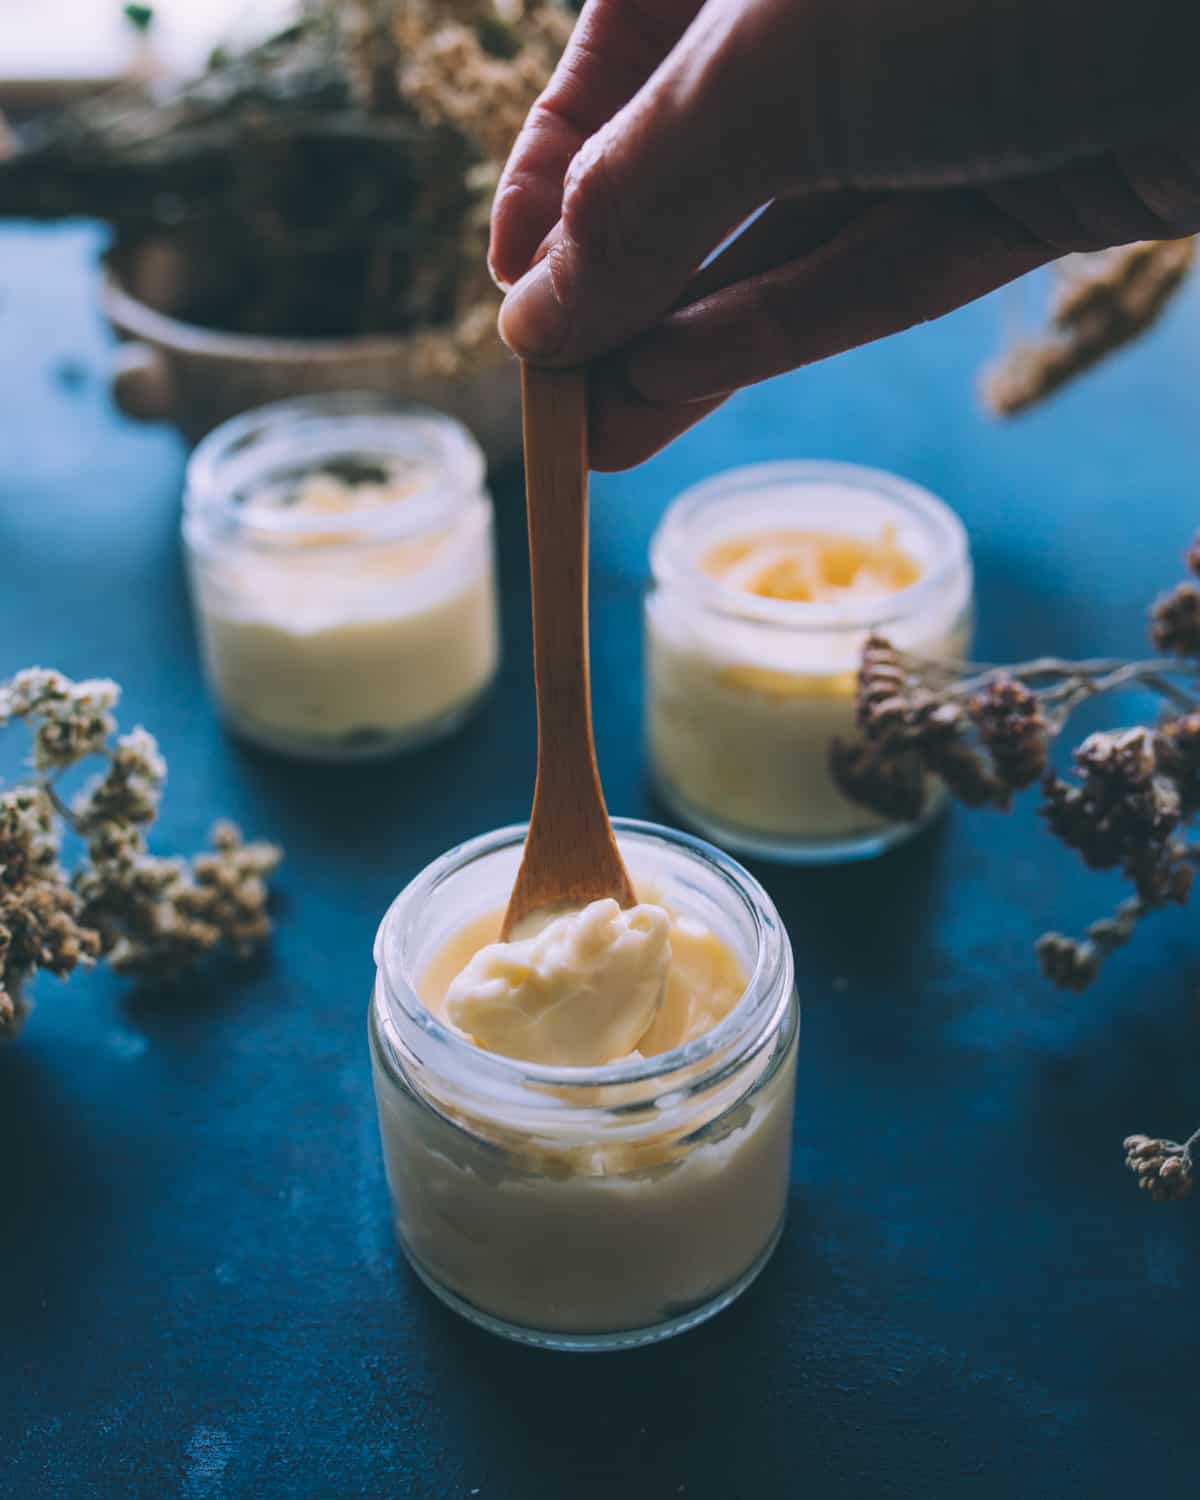 3 jars with no lids, filled with arnica and yarrow cream. The jar in the front has a small wooden spoon scooping out some cream to show the thick creamy texture, the other two jars are in the background on a dark blue countertop with dried yarrow flowers. 